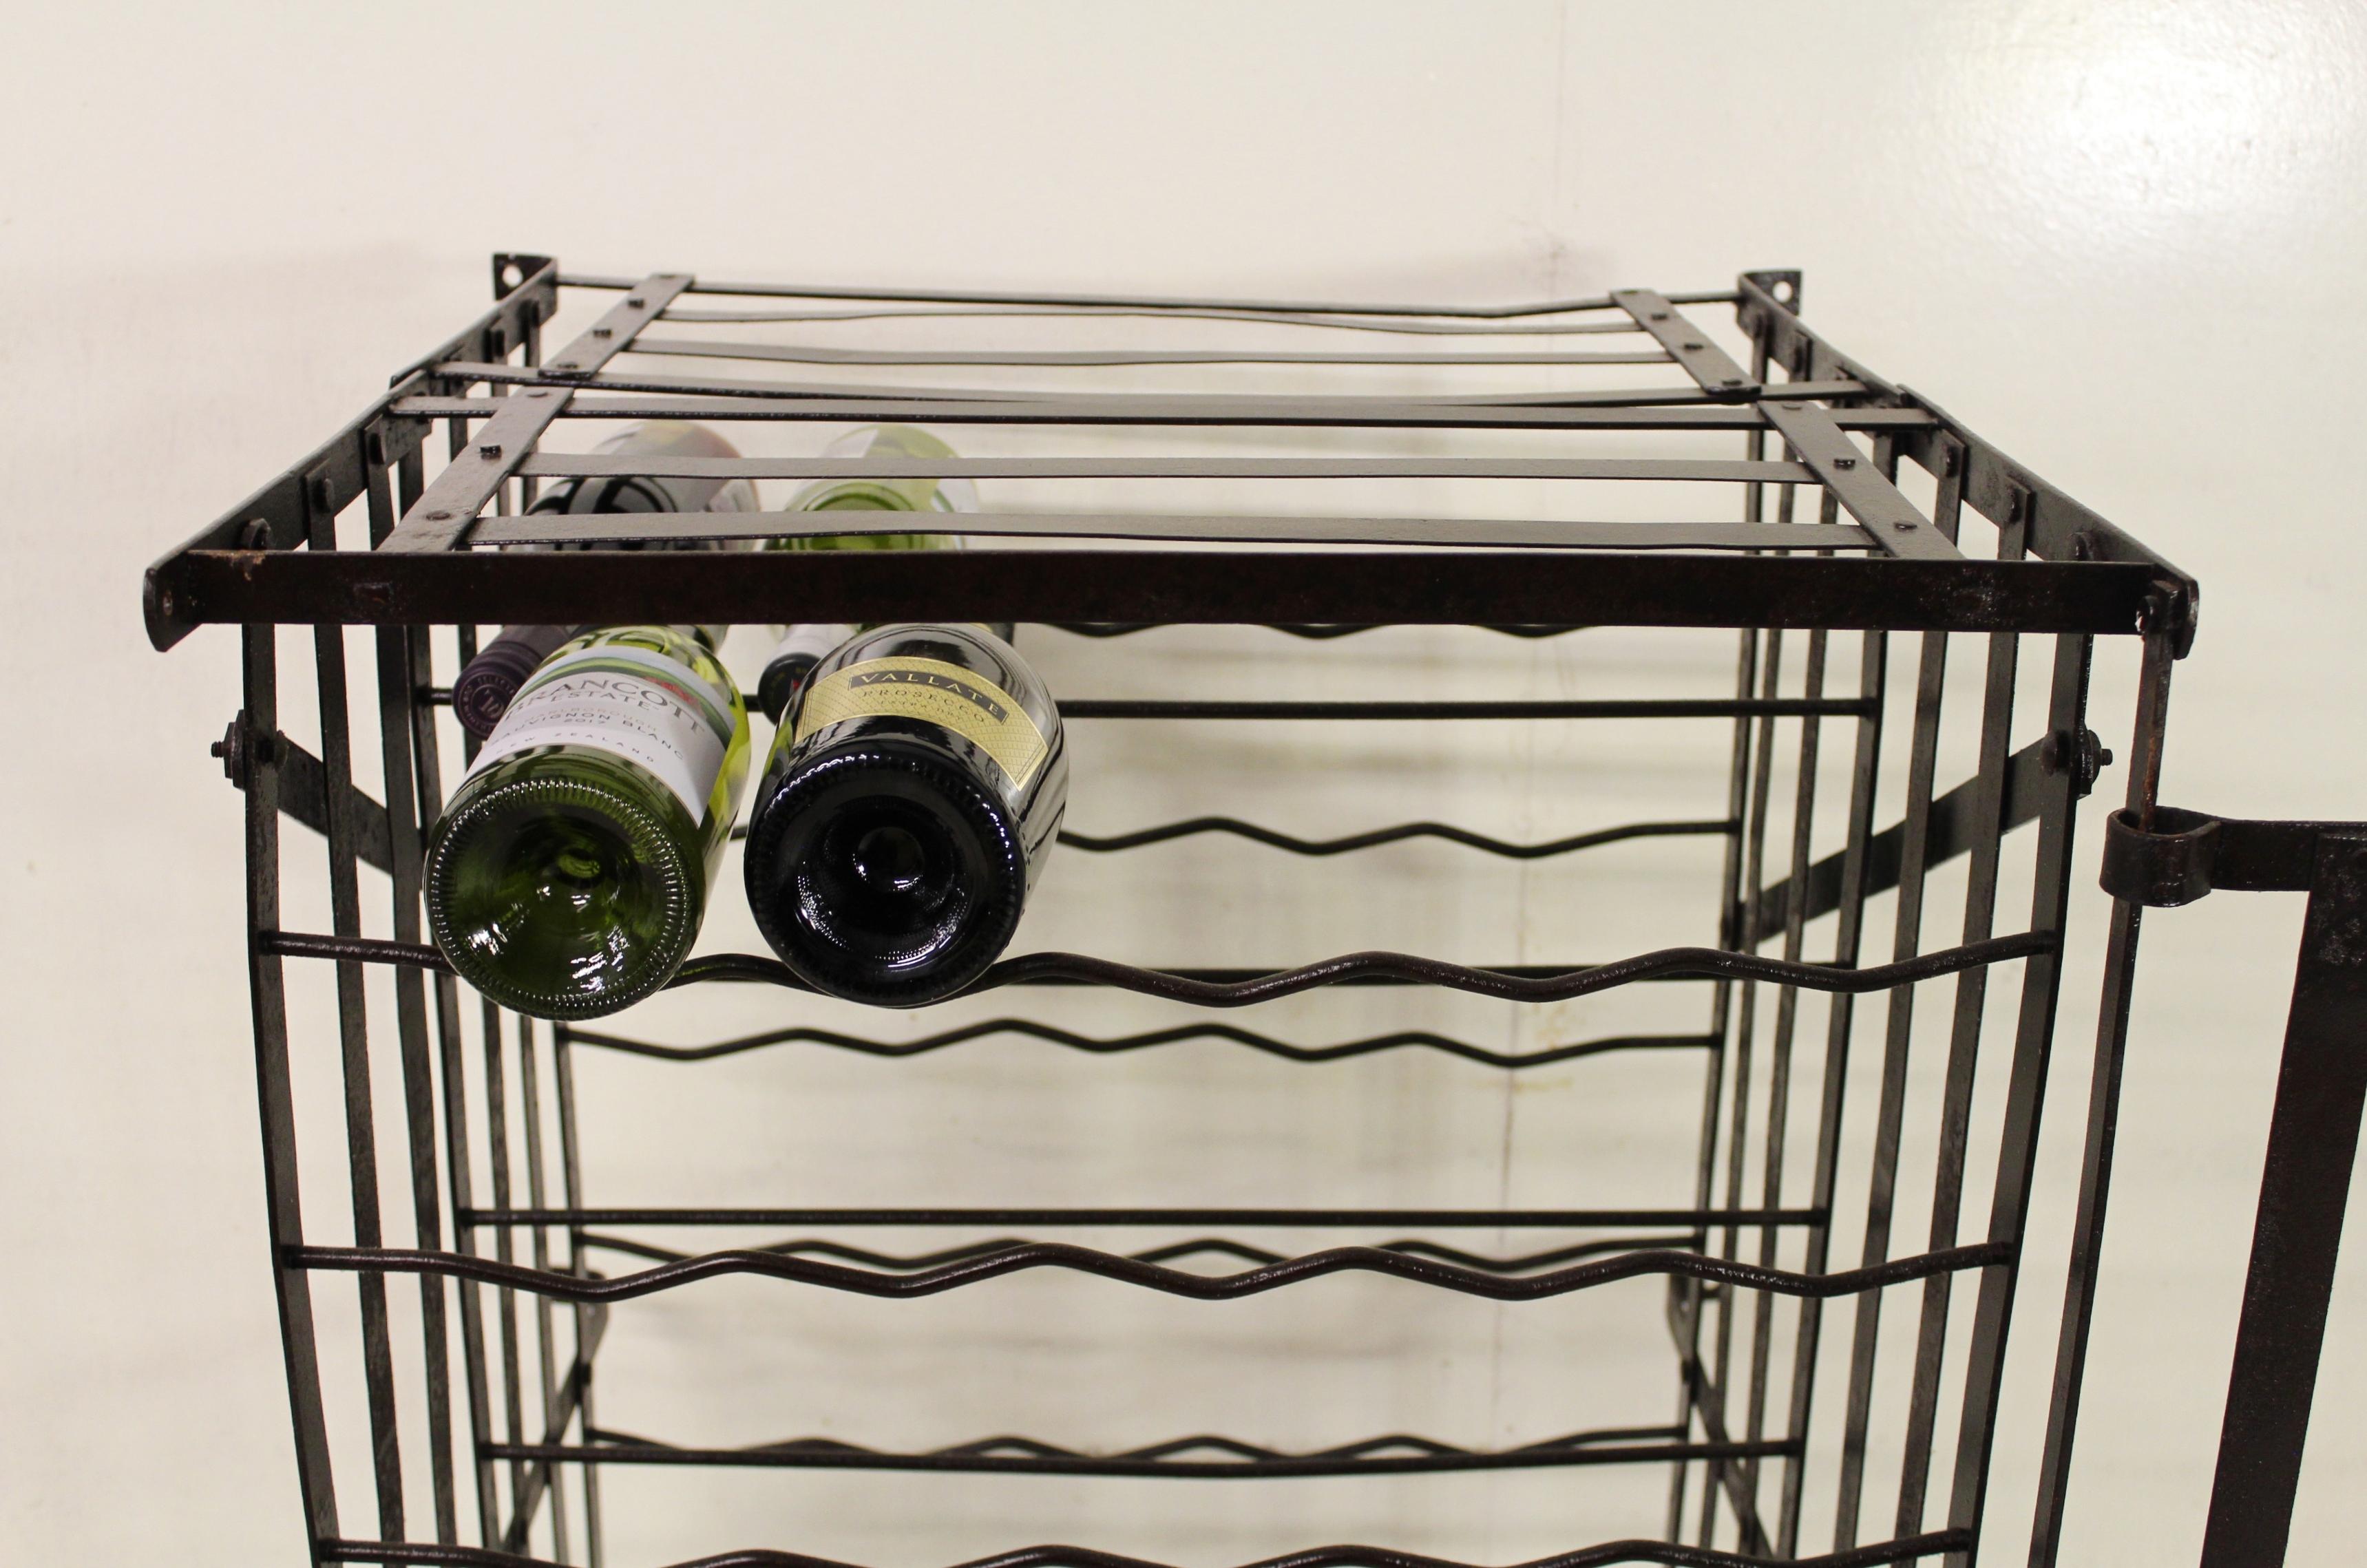 A charming French wine cage with 100 bottle capacity. Made from steel strap-work and with a closing door. Burnished and lacquered in our workshops and now offered for sale in good condition, ready to go straight into the home.